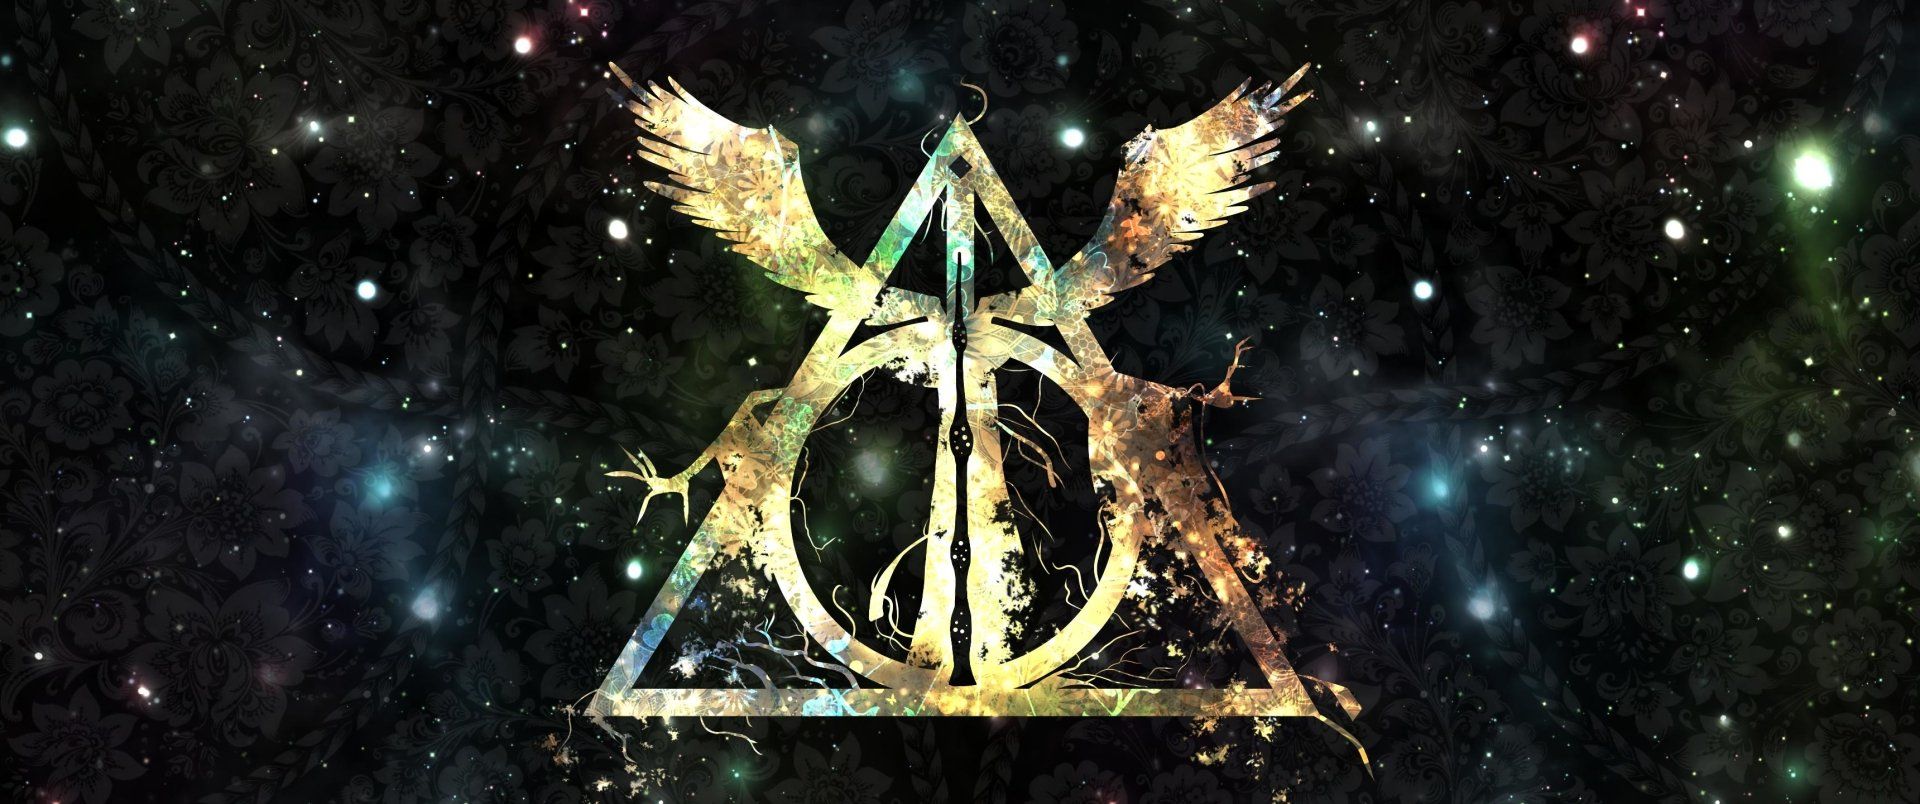 Wallpapers of Harry Potter, Deathly Hallows backgrounds & HD image